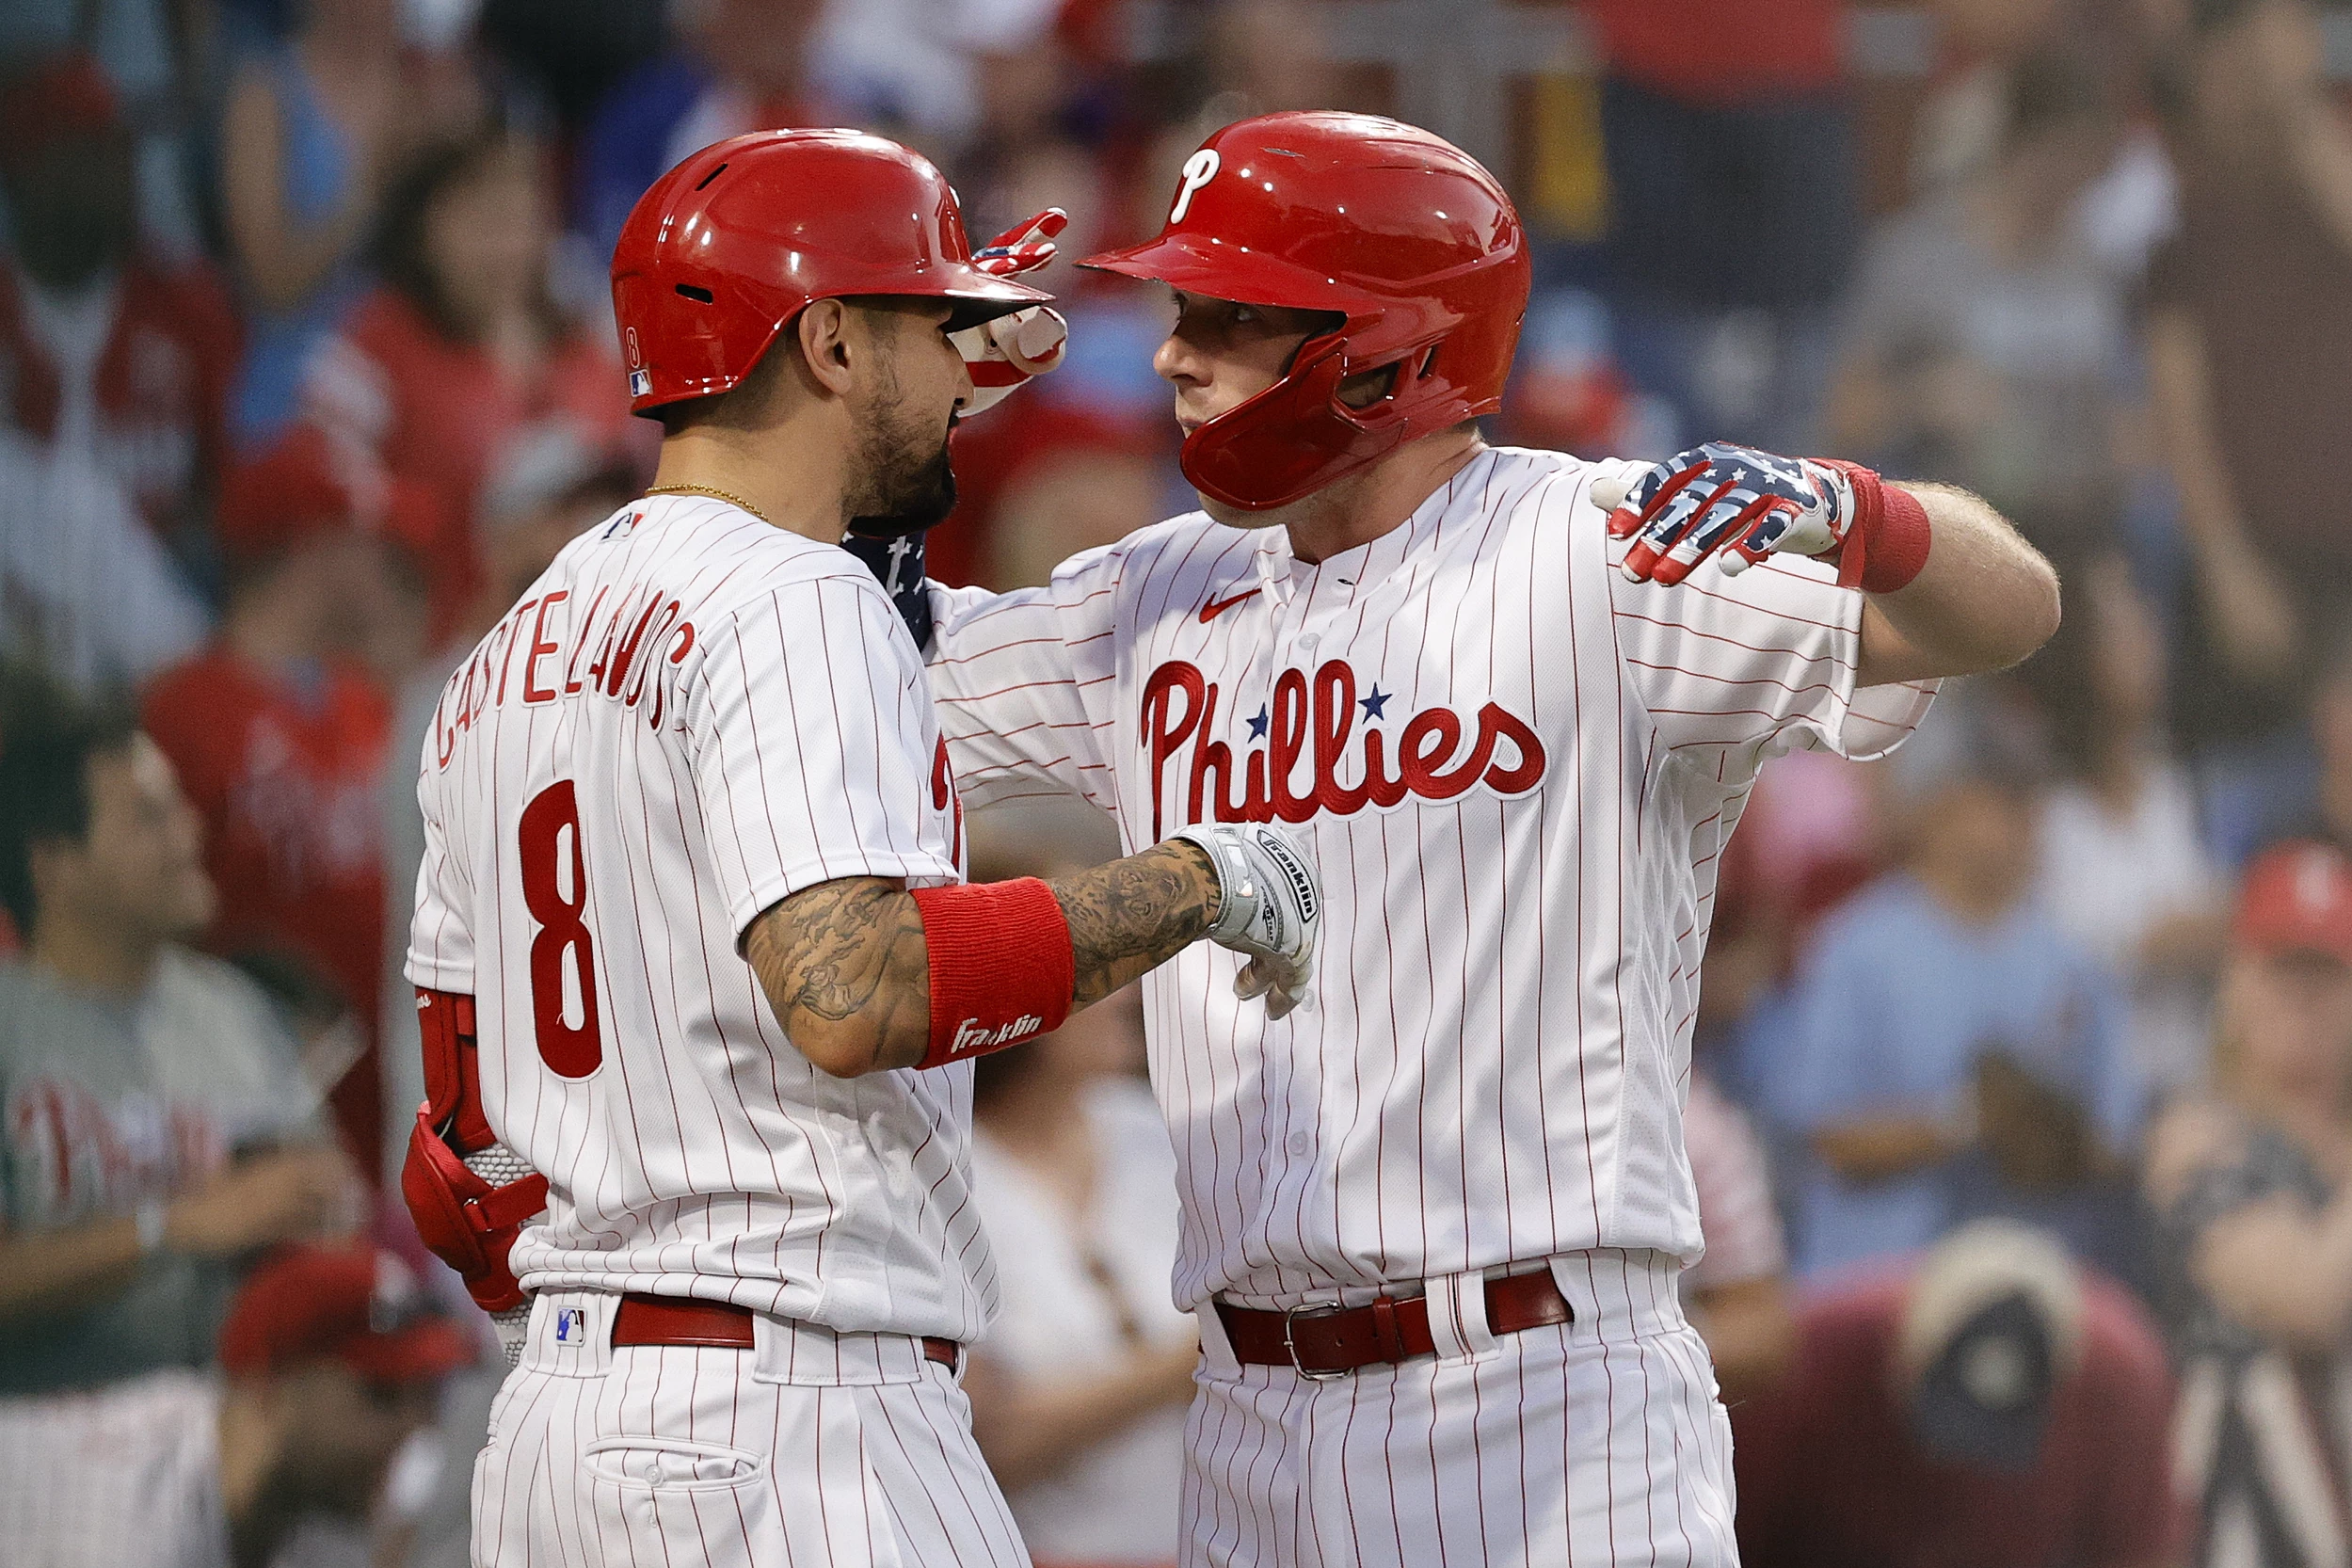 For Phillies' Rhys Hoskins, it's back to defensive basics every